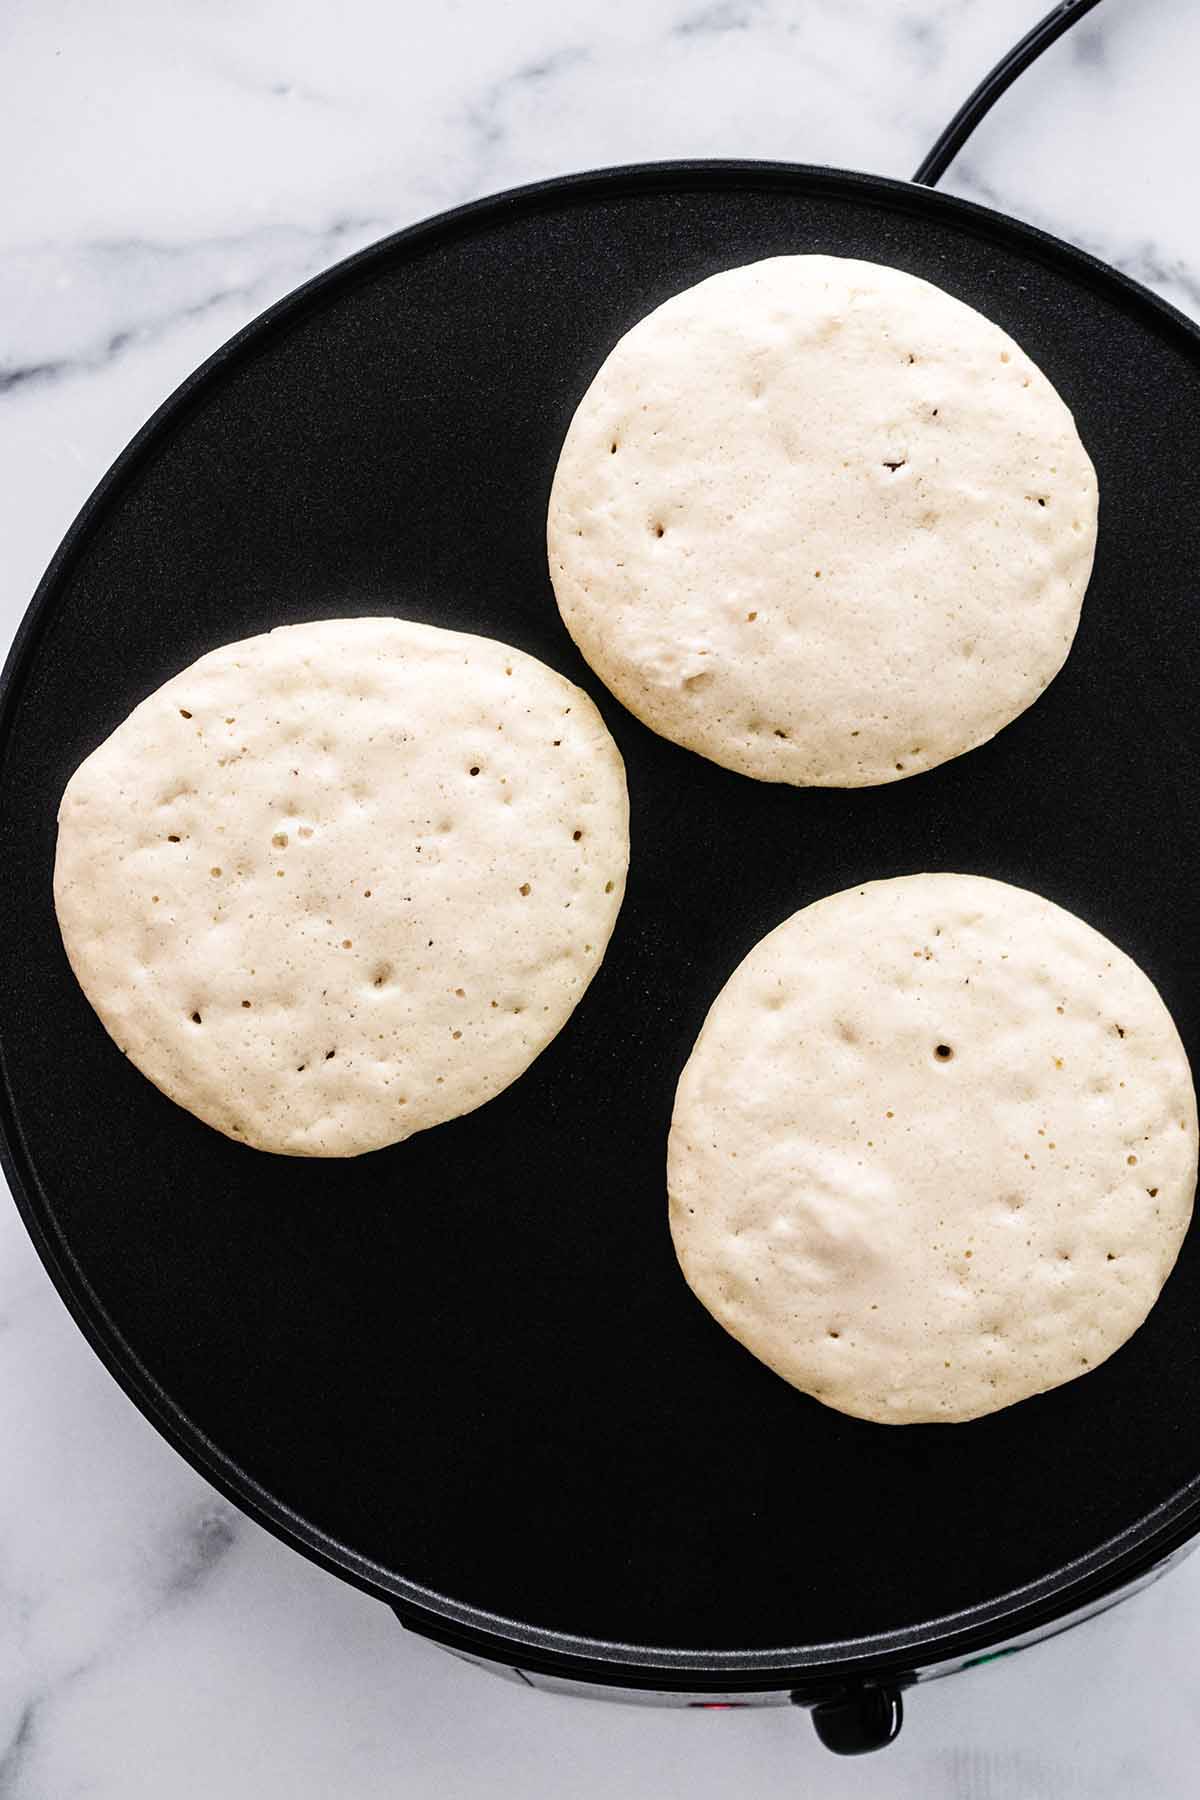 Three cassava flour pancakes bubbling and cooking on a griddle.